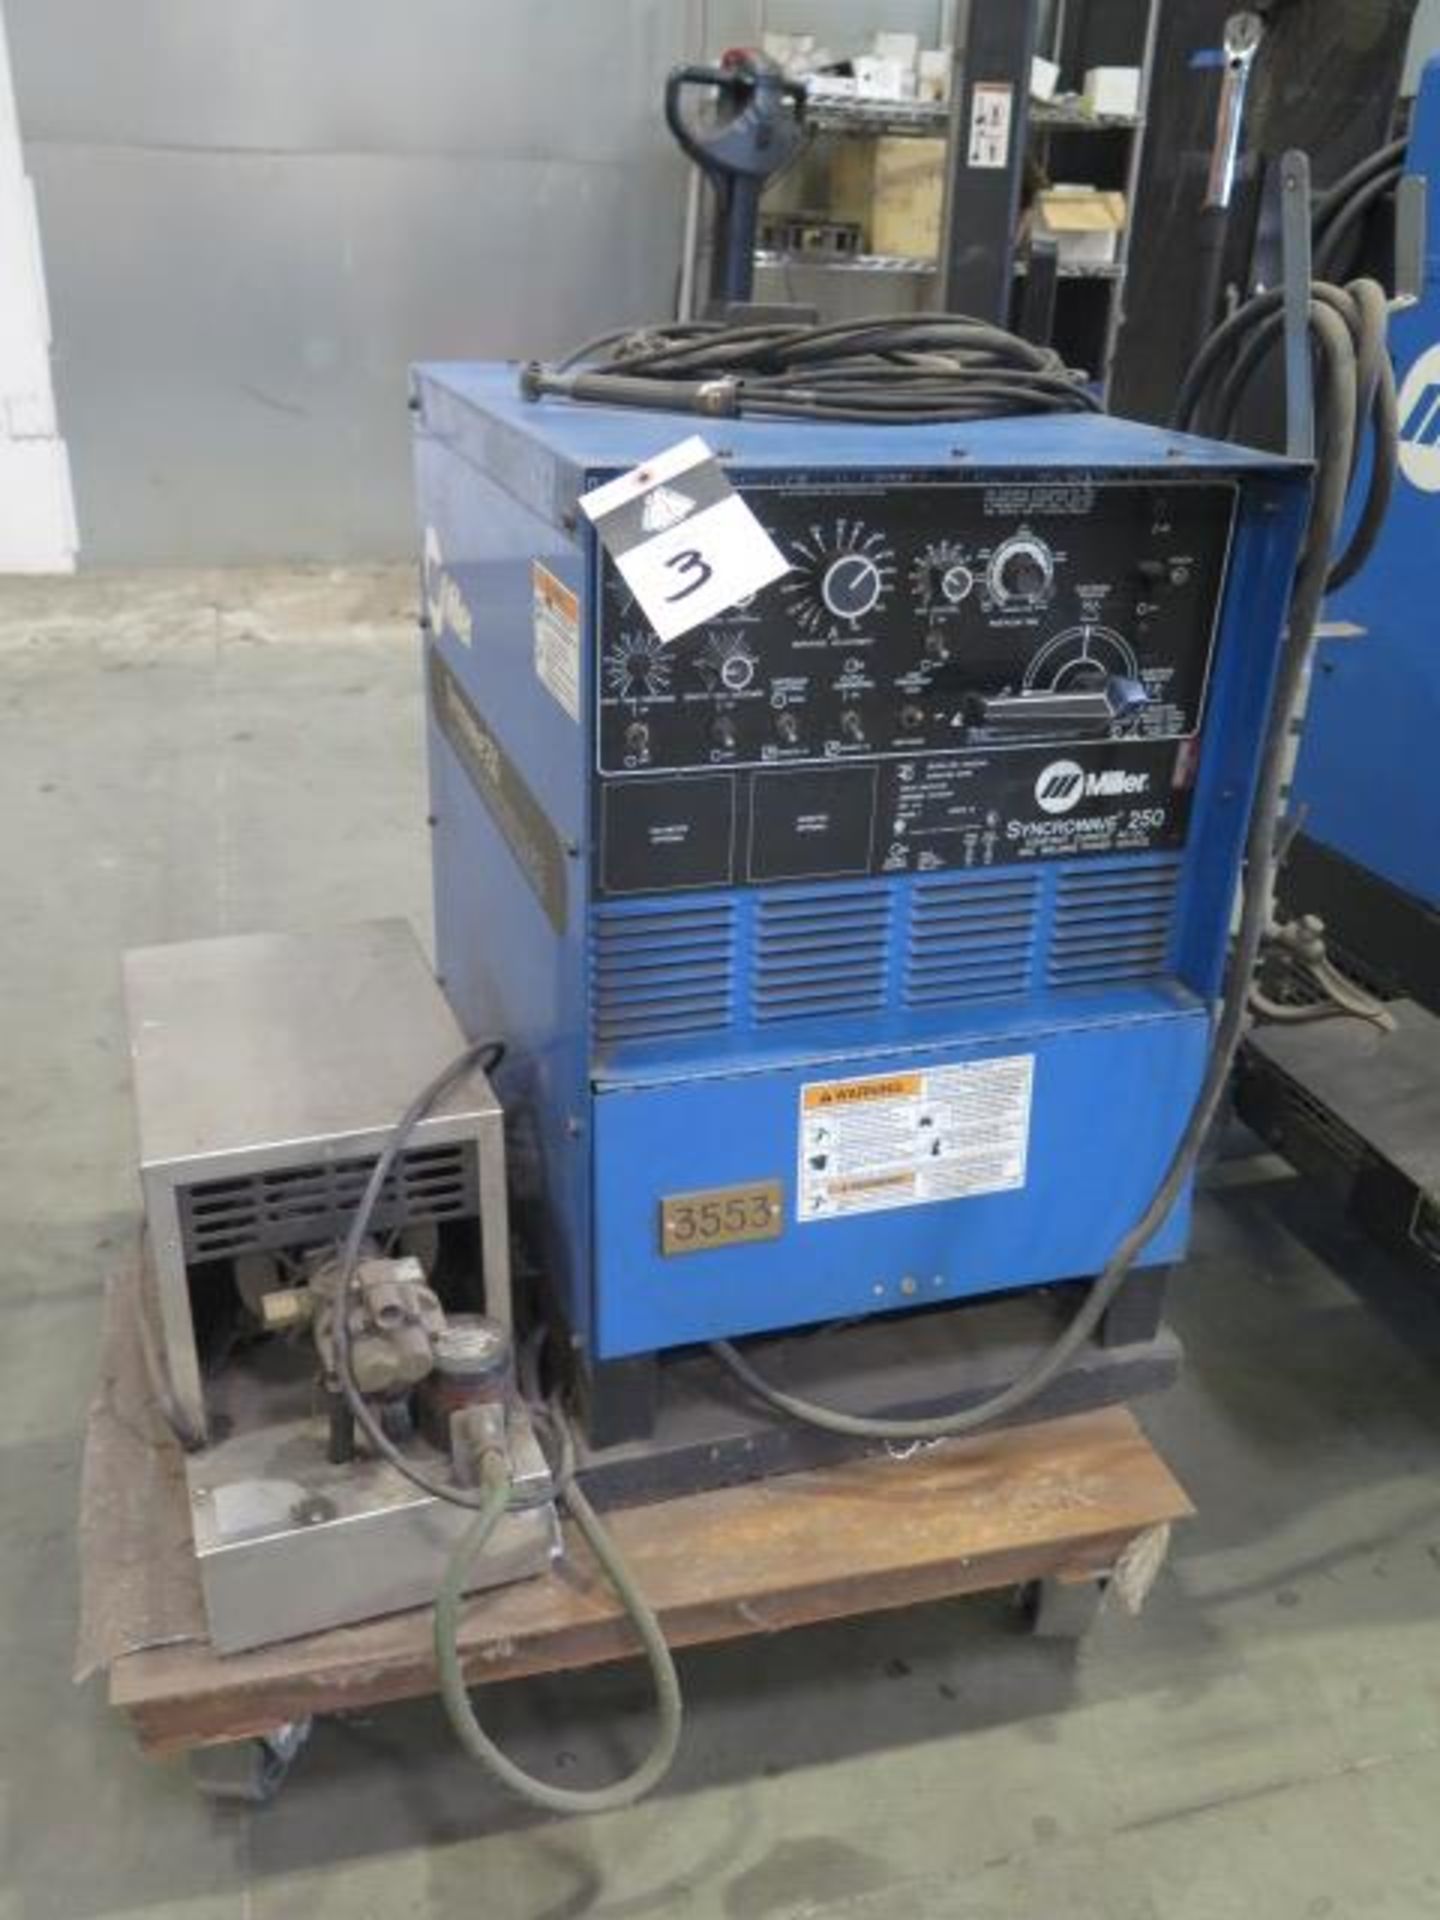 Miller Syncrowave 250 CC-AC/DC Arc Welding Power Source s/n KF922843 w/ WeldTec Cooler, SOLD AS IS